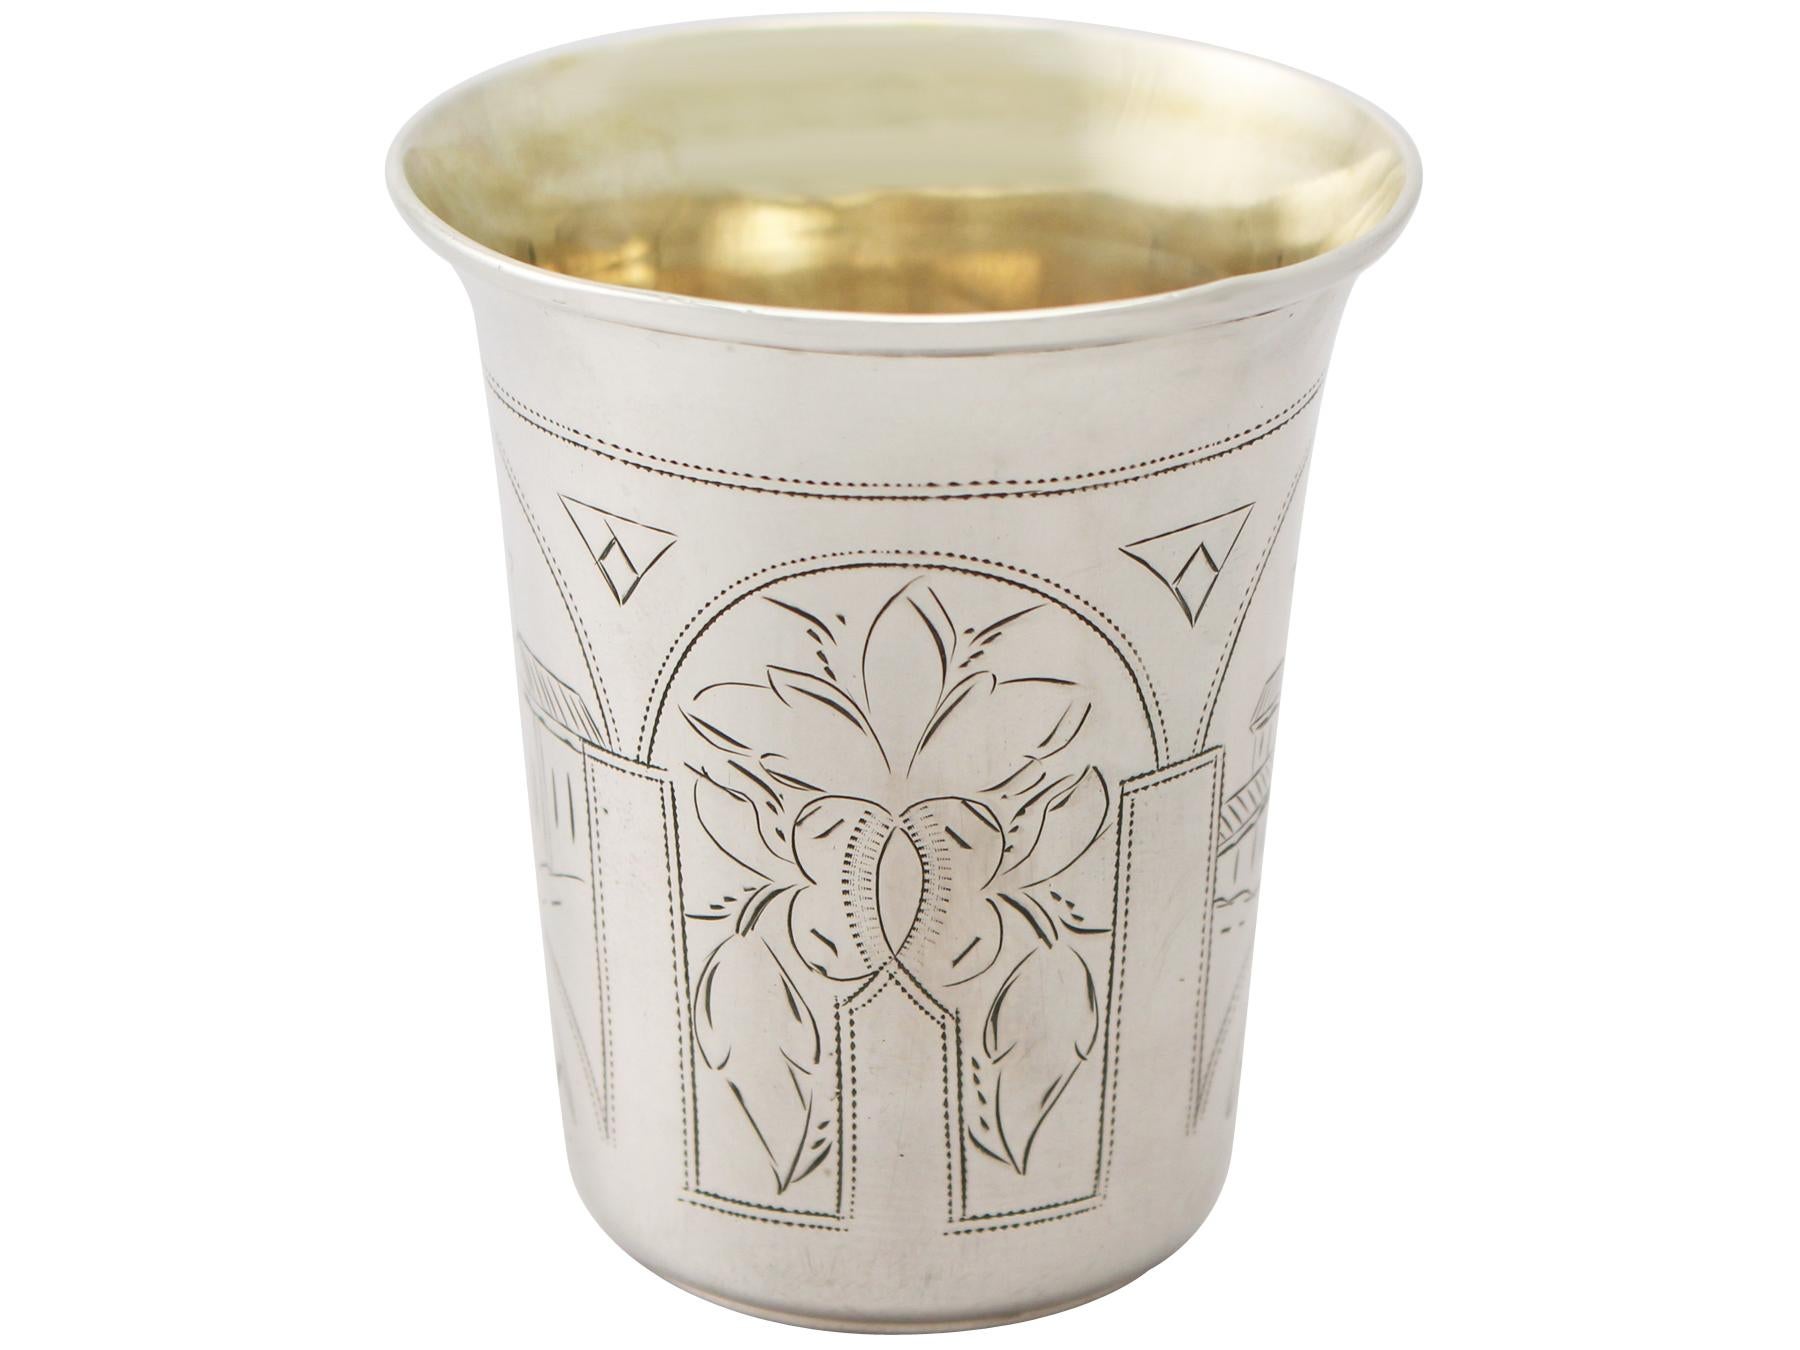 A fine and impressive antique Russian silver Kiddush cup / beaker; an addition to our range of drinks related silverware

This fine antique Russian silver Kiddush cup / beaker has a cylindrical tapering form onto a collet style base.

The surface of